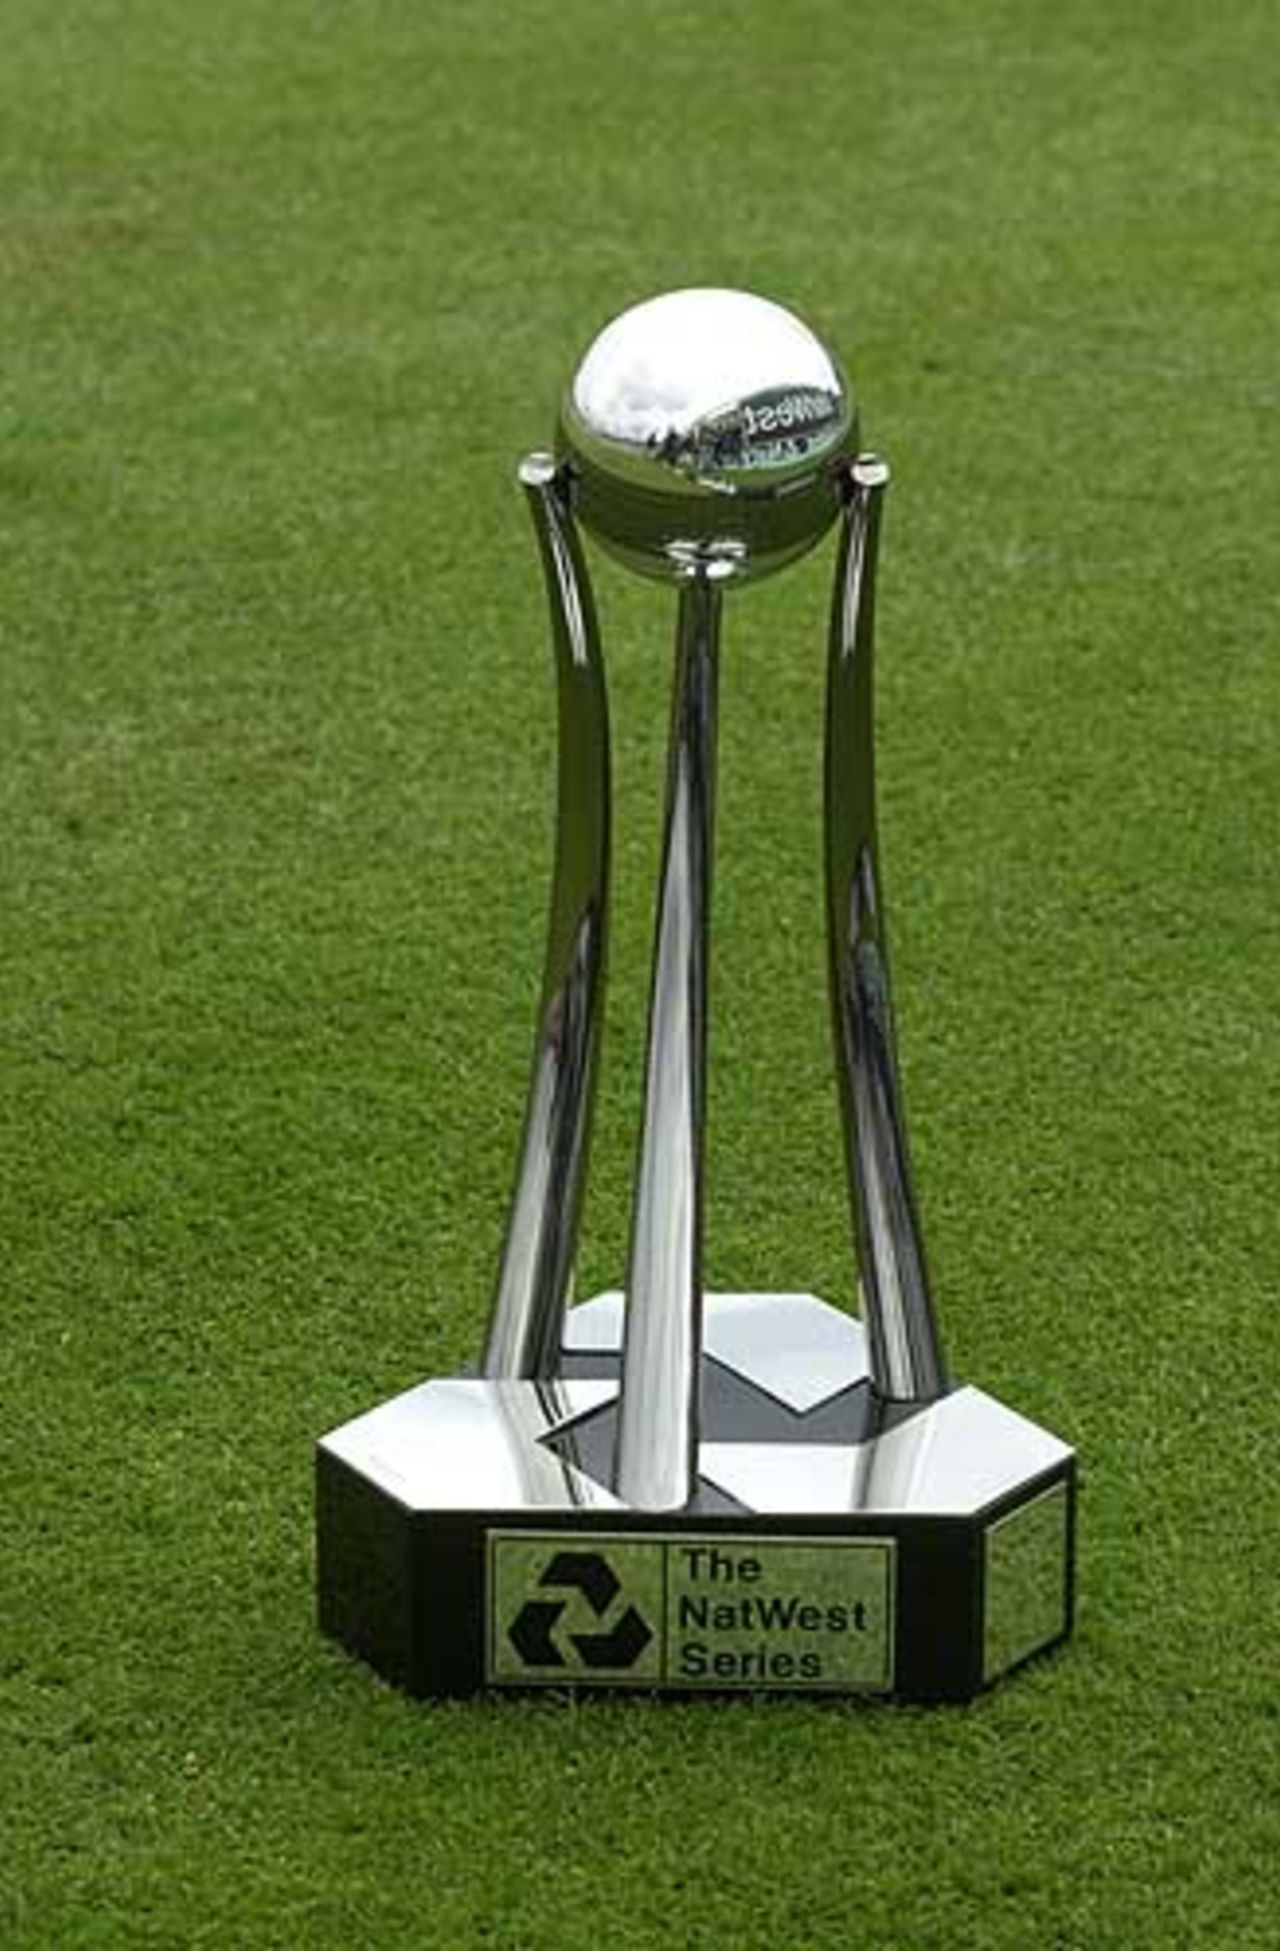 The NatWest Trophy